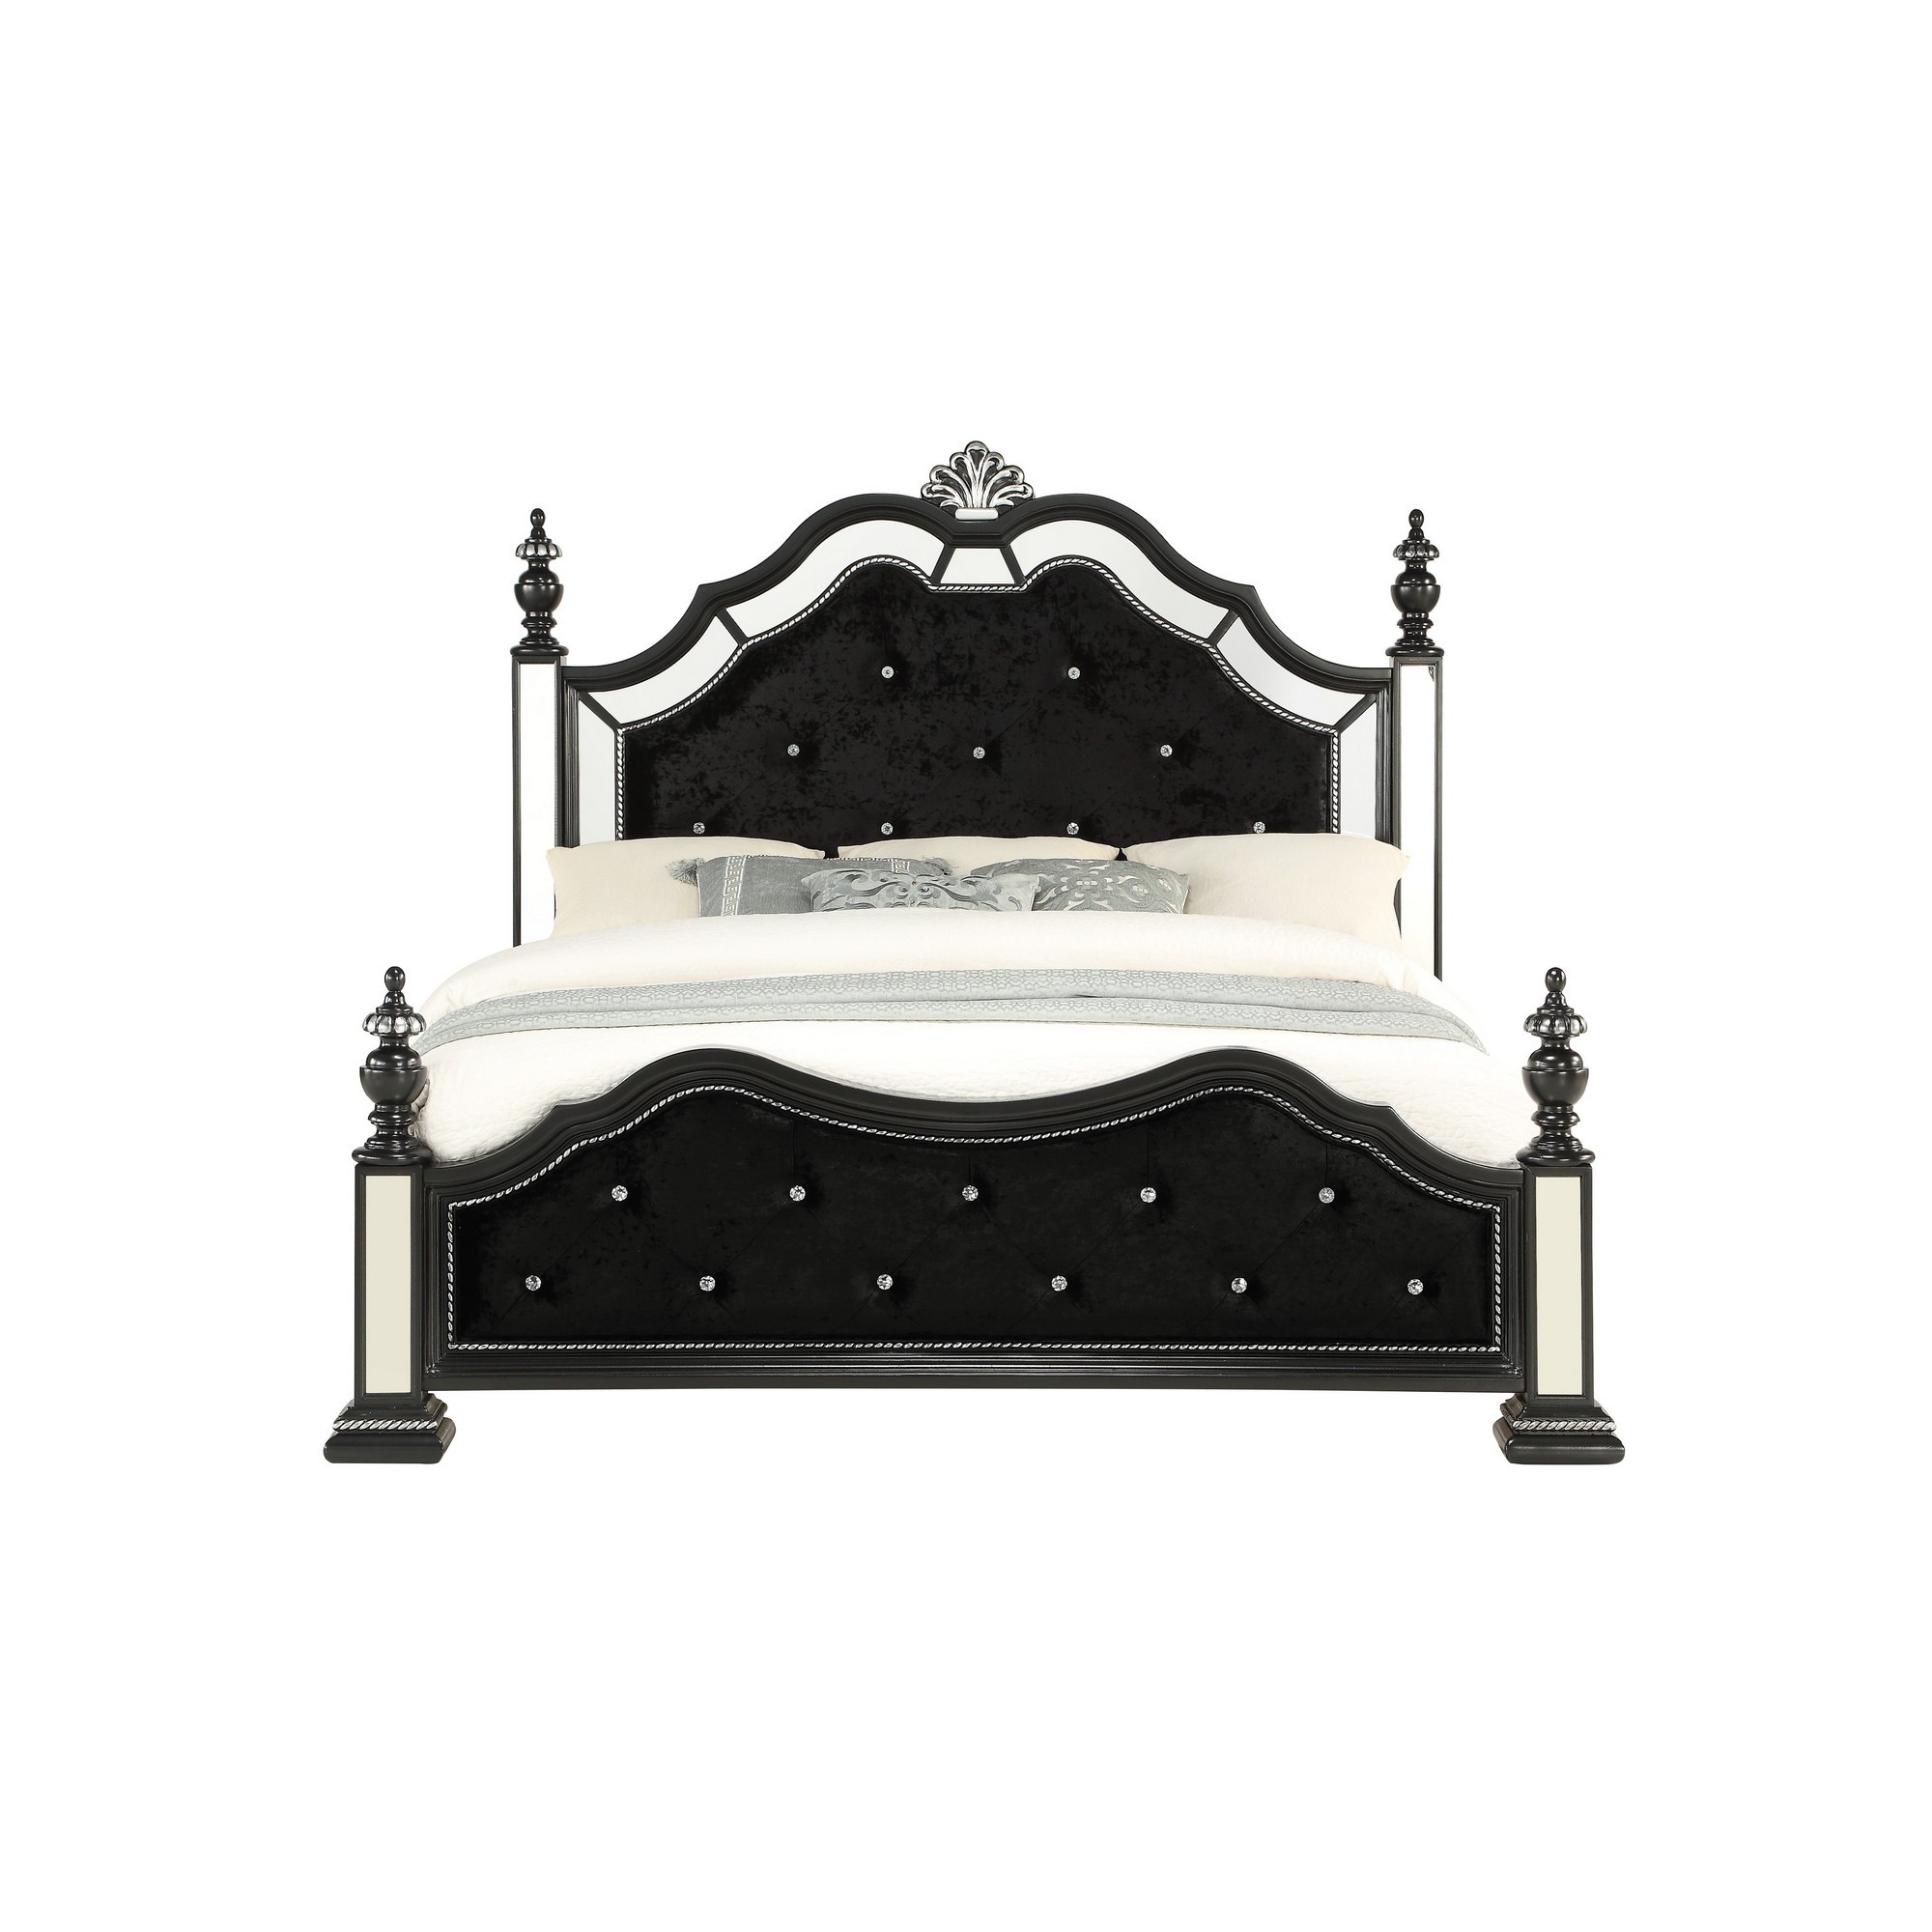 Black Felt finish King Bed with crystal mirrored embellished